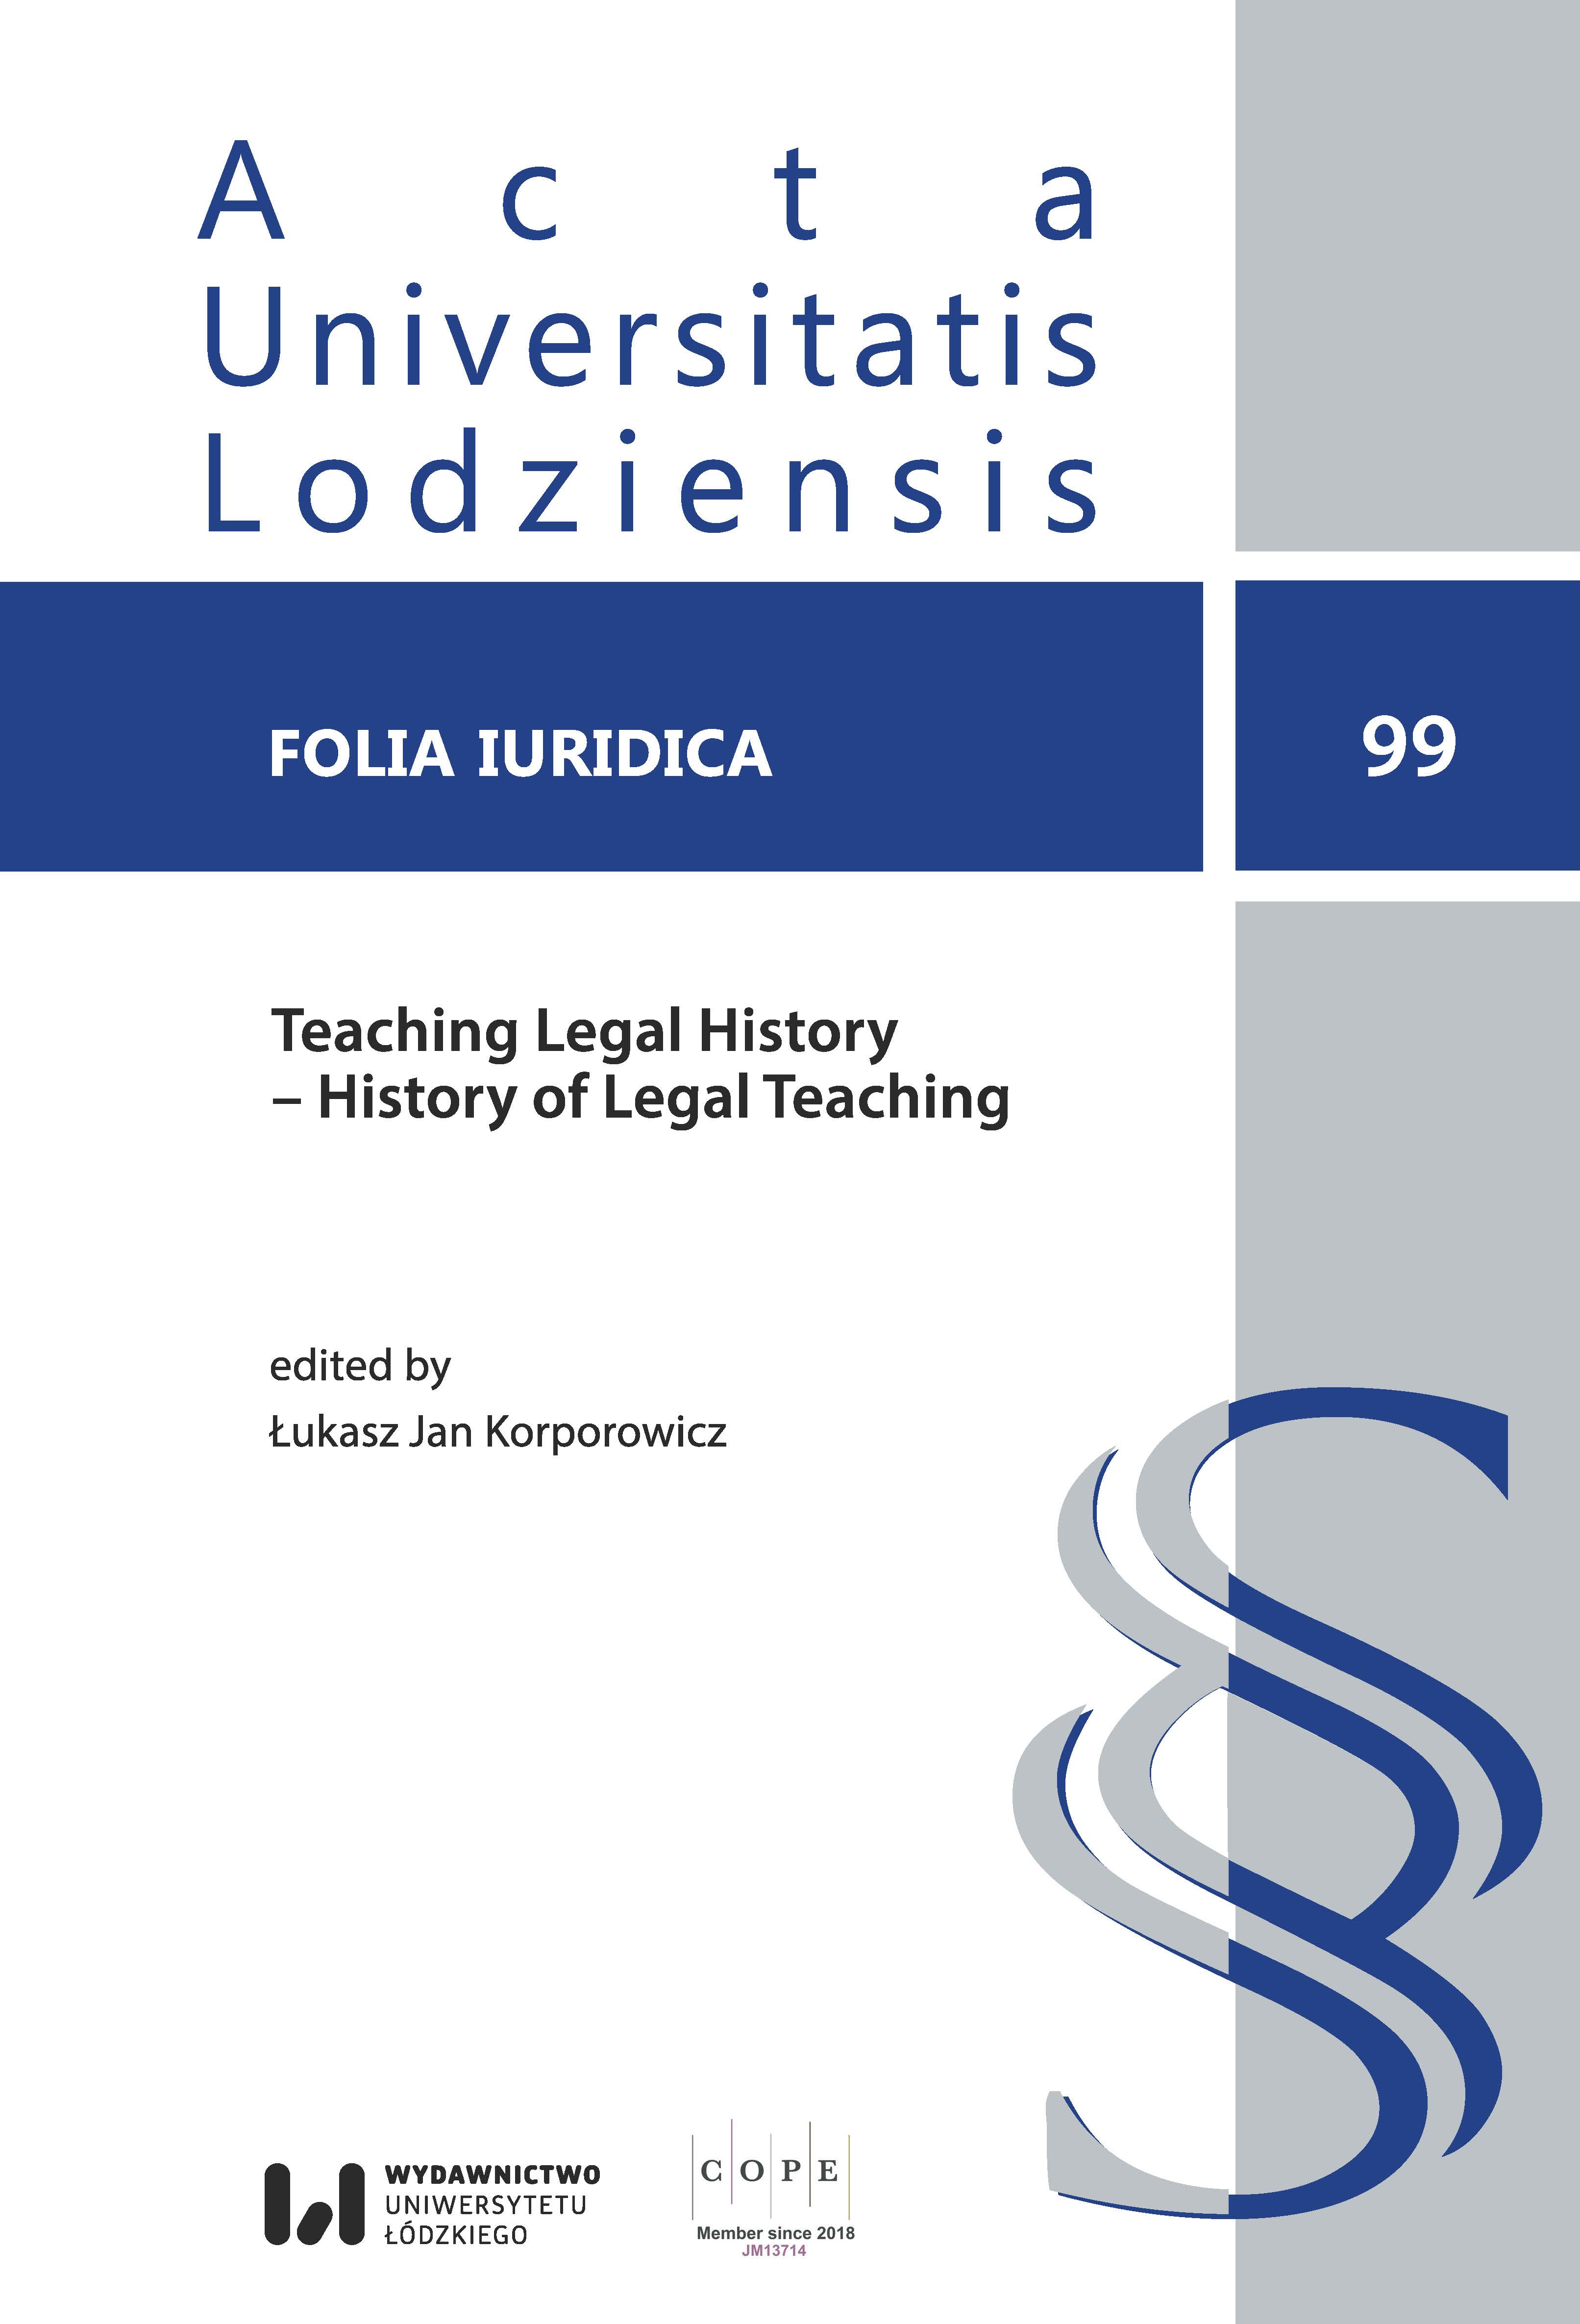 The Education of Roman Law from 1874 to 1894 in Japan. The Transition of Contemporary Model of Legal Systems in the West and the Intellectual Backgrounds of Professors in Charge of Roman Law Cover Image